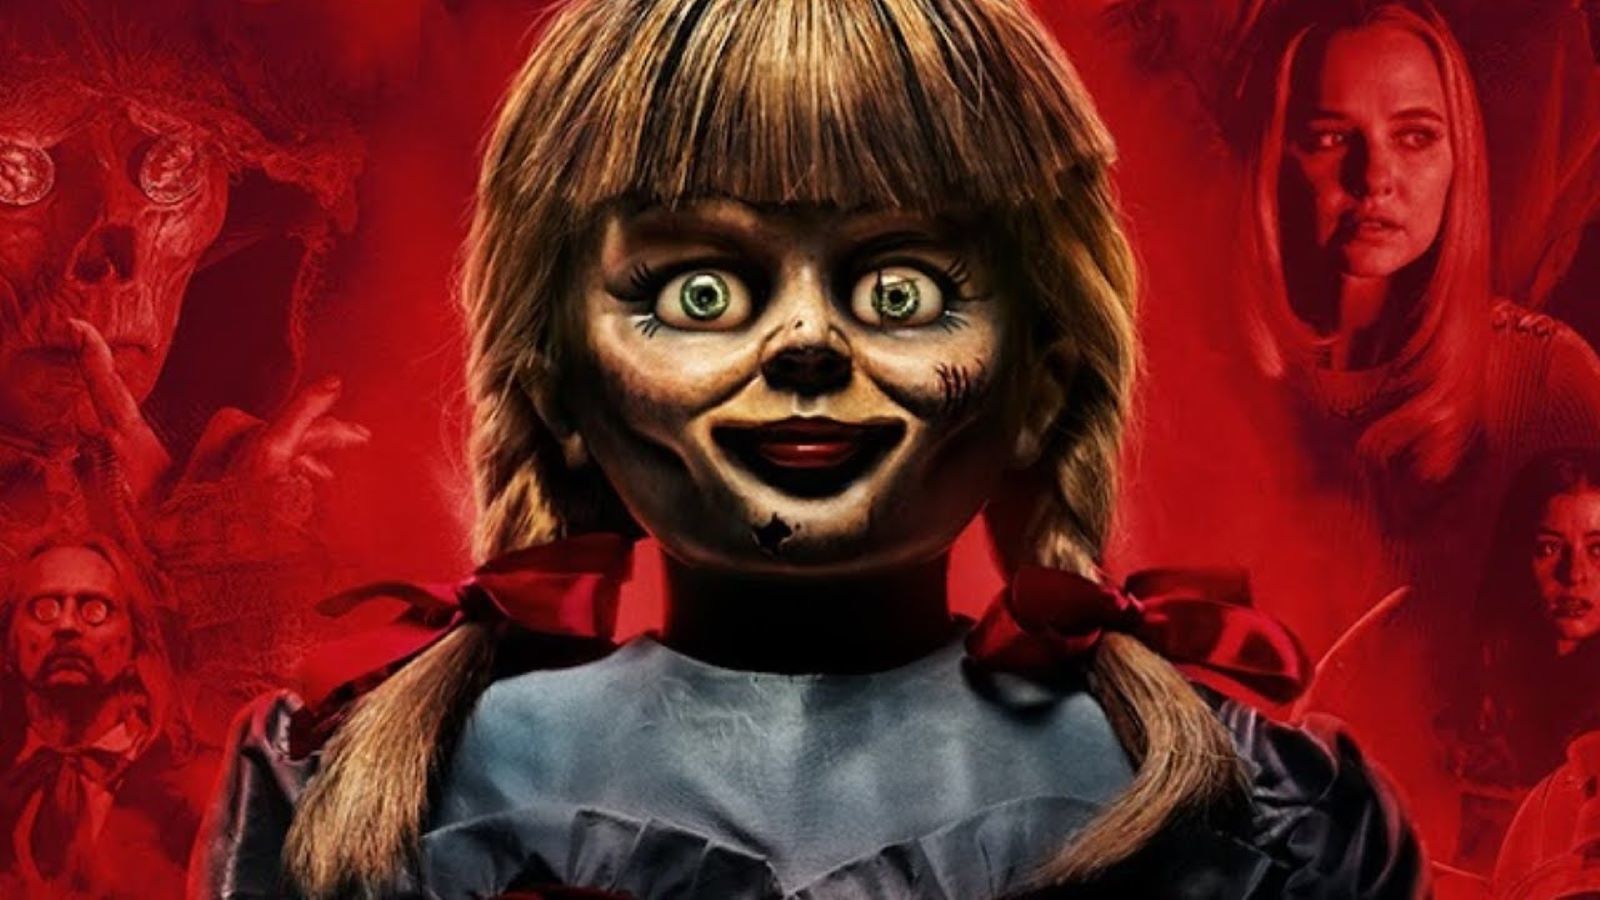 Is The Annabelle Doll Real? The Scariest Real Life Revelations